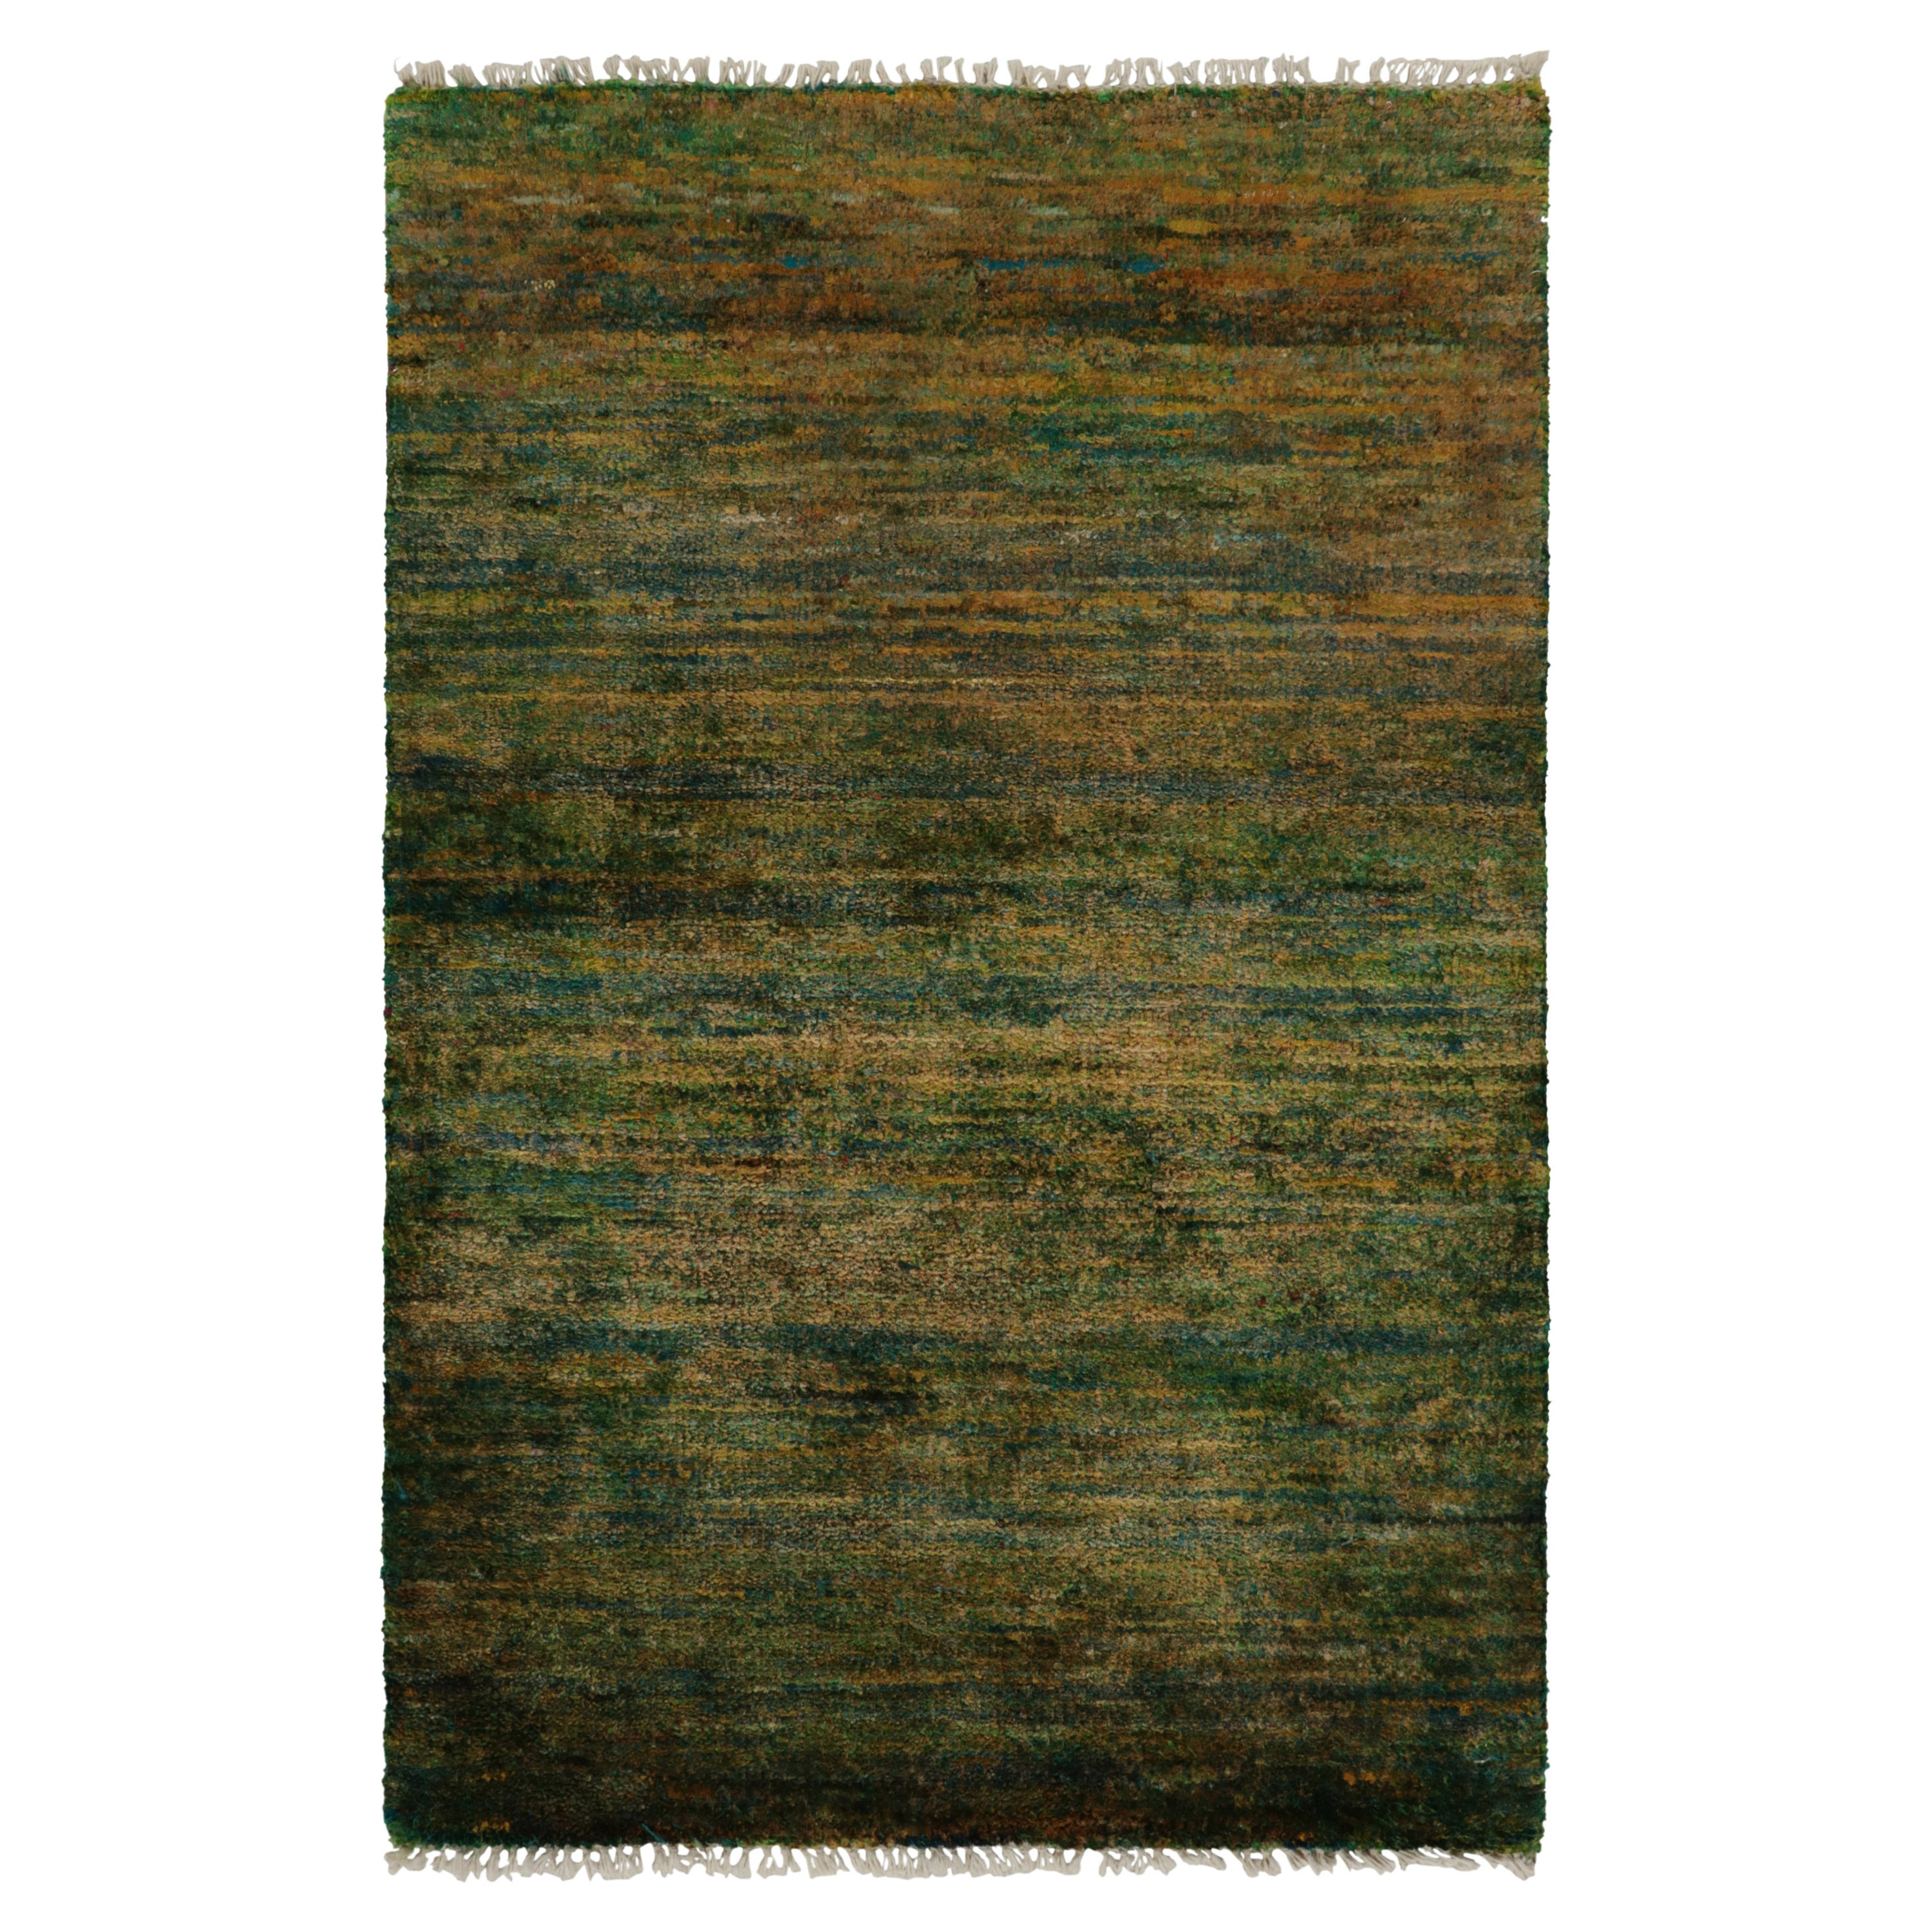 Rug & Kilim introduces its refined take on modern aesthetics with this smart, solid rug in 2x3 rug from our Texture of Color collection. The contemporary piece revels in a rejuvenating yet luscious colorway of luxurious green & gold with blue accent